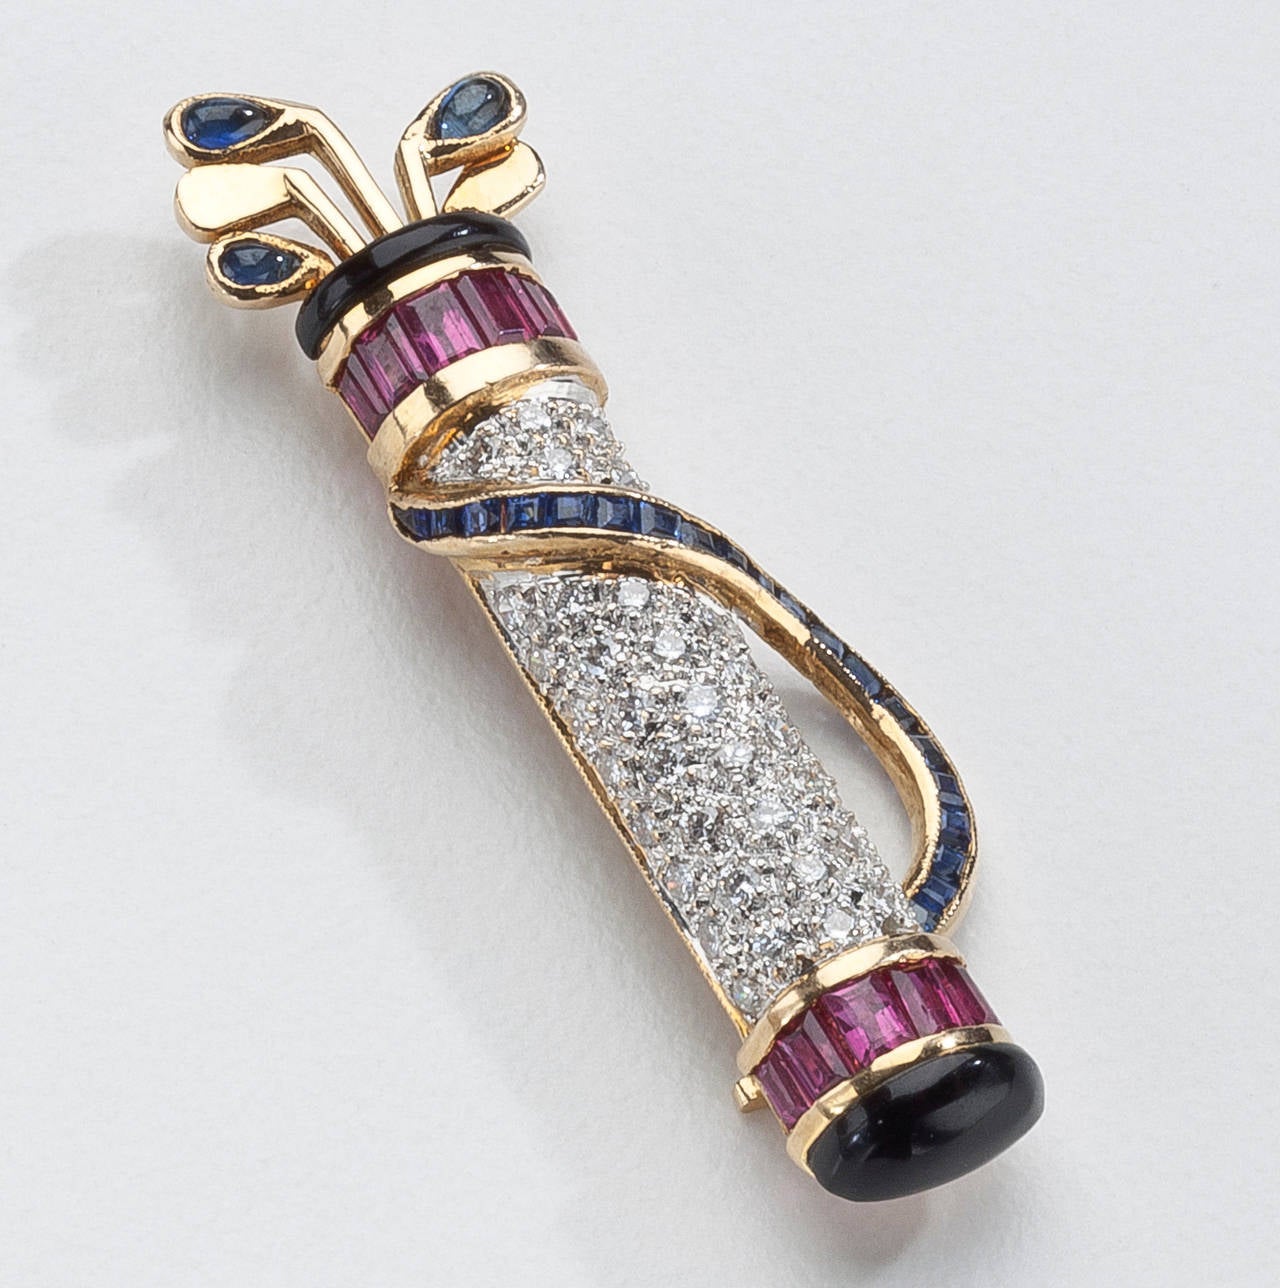 An 18 karat gold lapel brooch of a golf bag with five clubs.  The brooch is highlighted by twelve baguette cut rubies, sapphires, meli diamonds and onyx.  Signed Le Vian